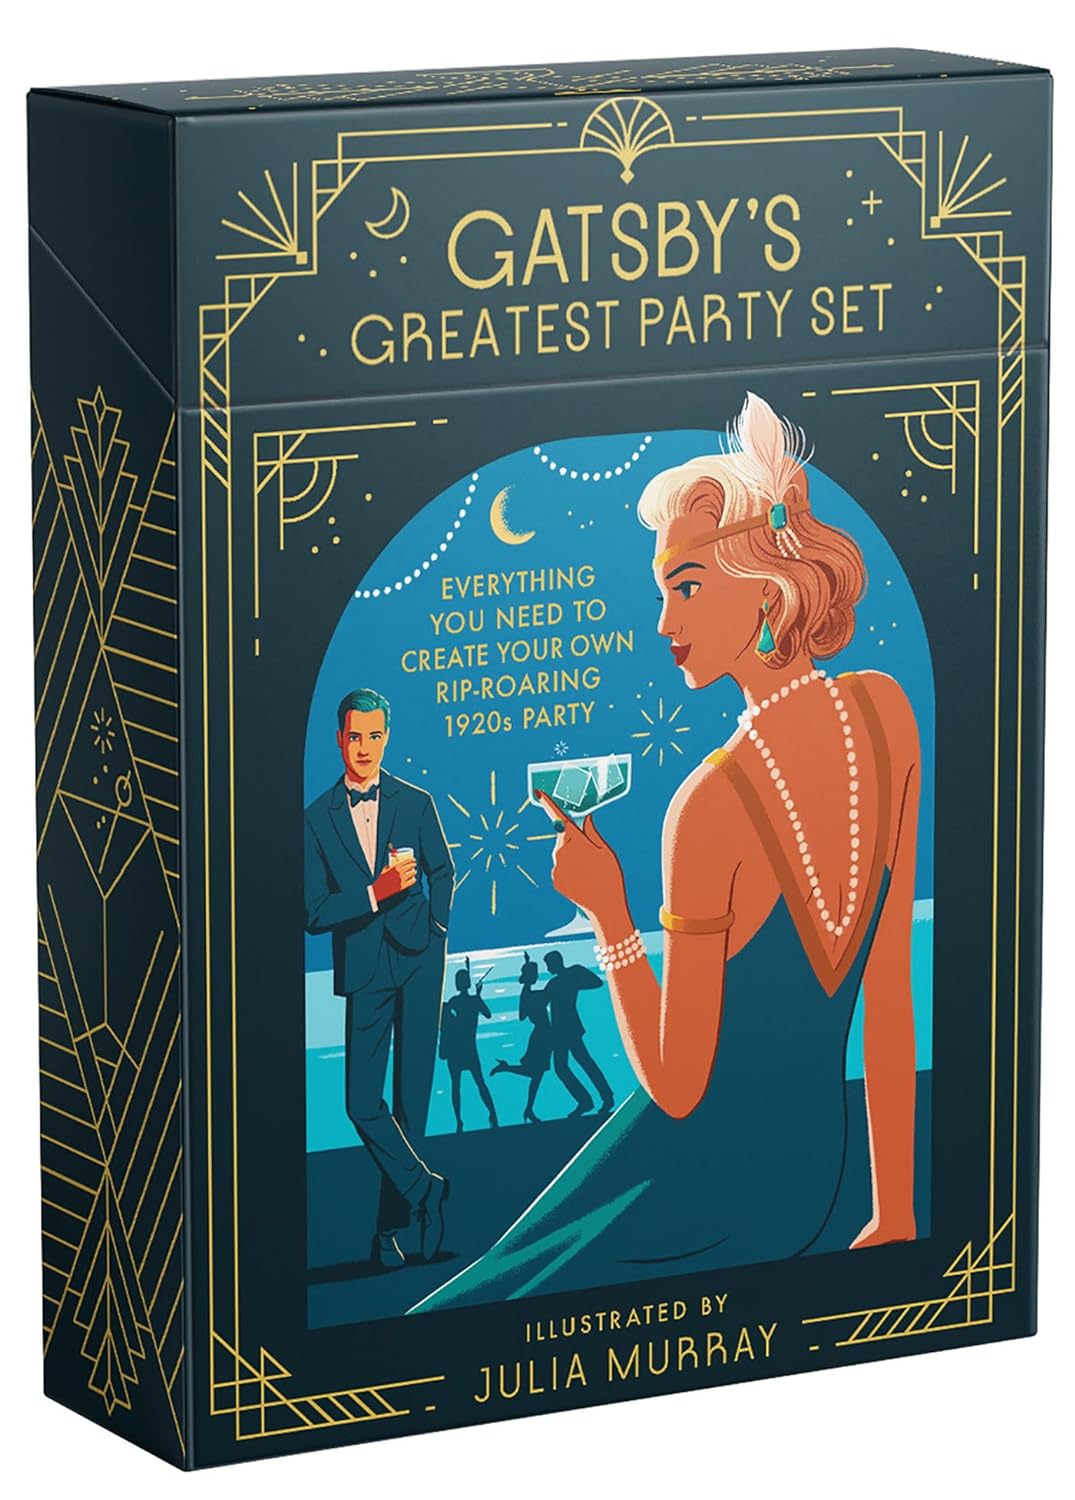 Gatsby's Greatest Party Set: